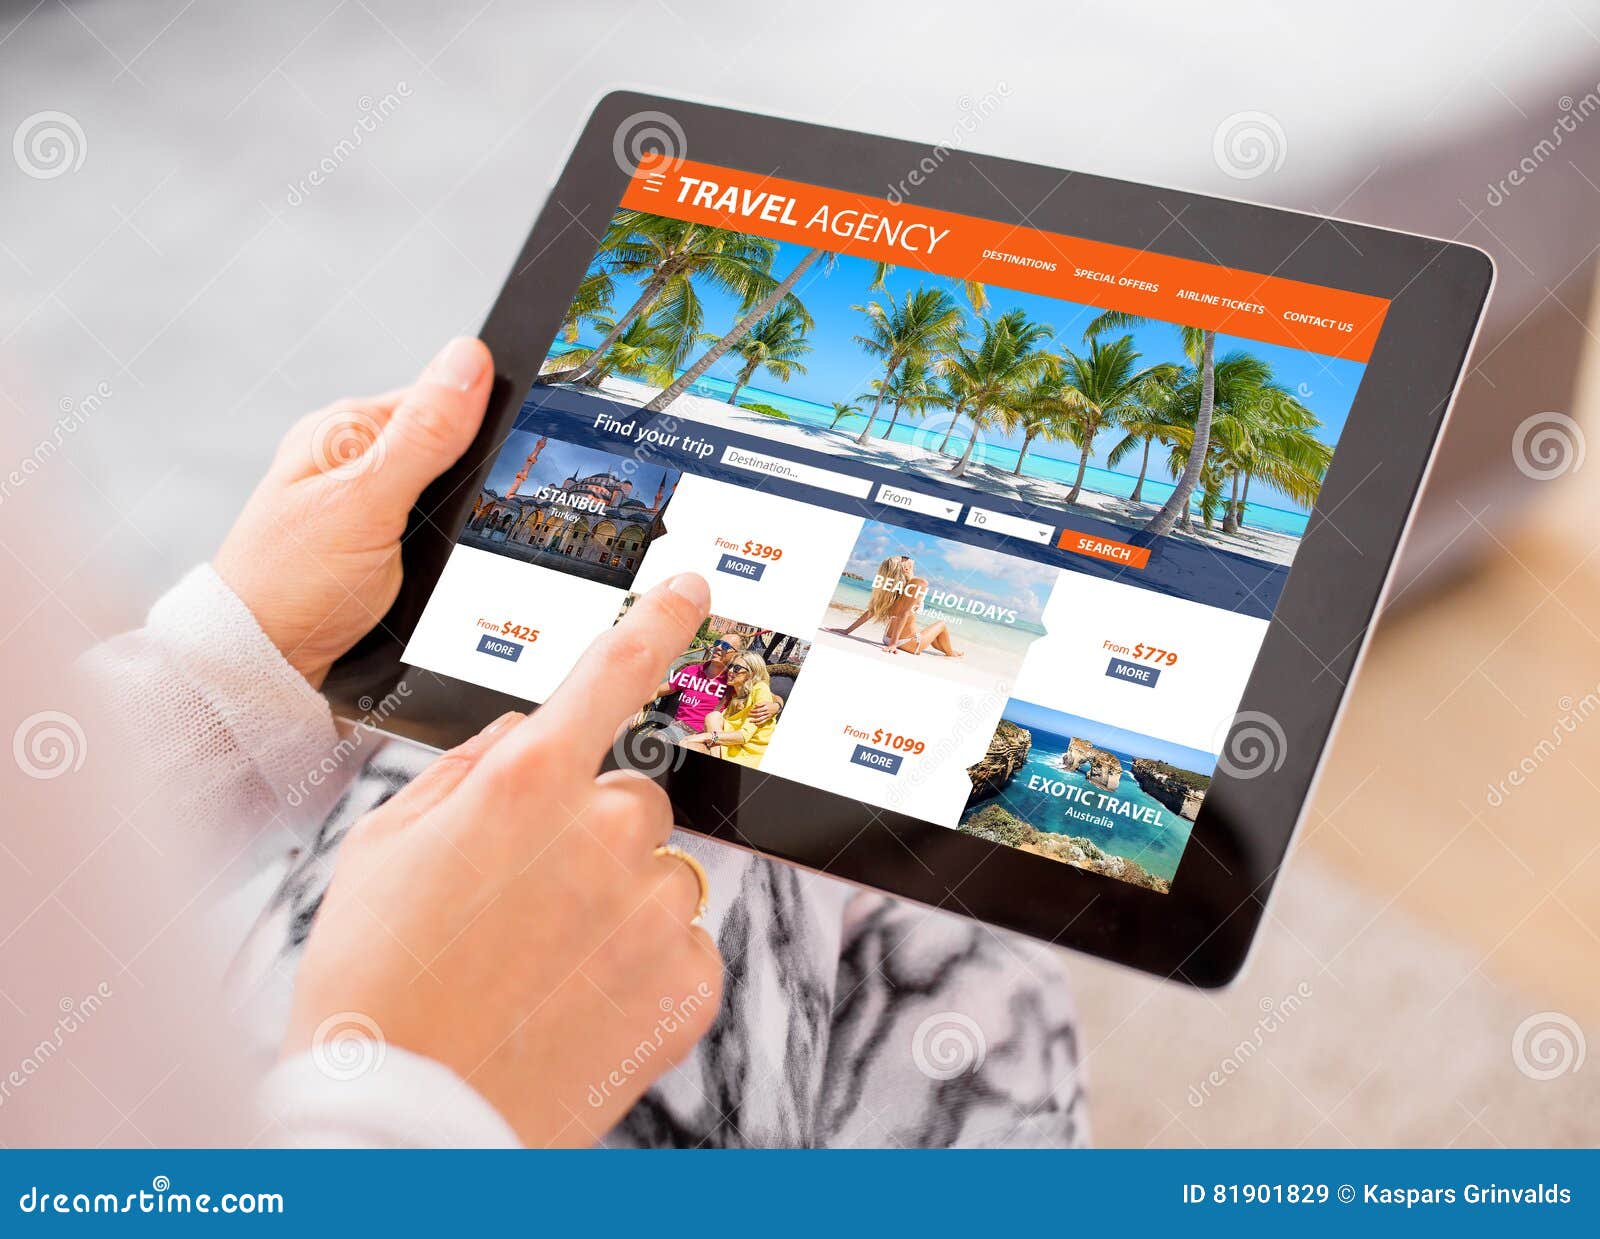 travel agency`s website on tablet computer